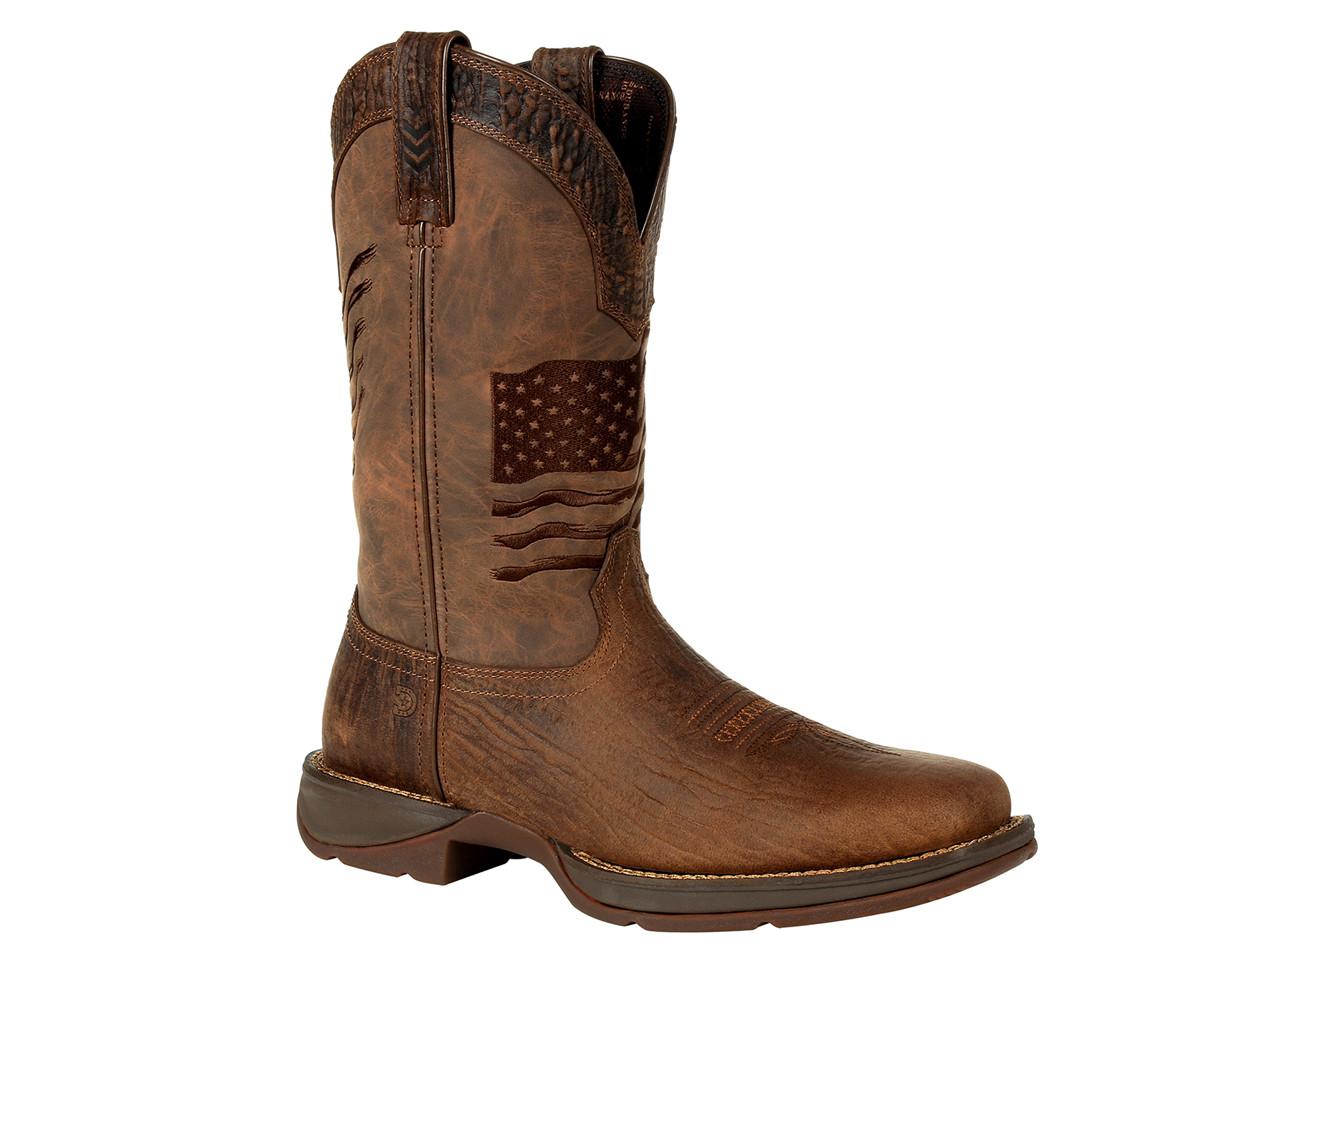 Men's Durango Rebel Brown Distressed Flag Embroidery Western Boots